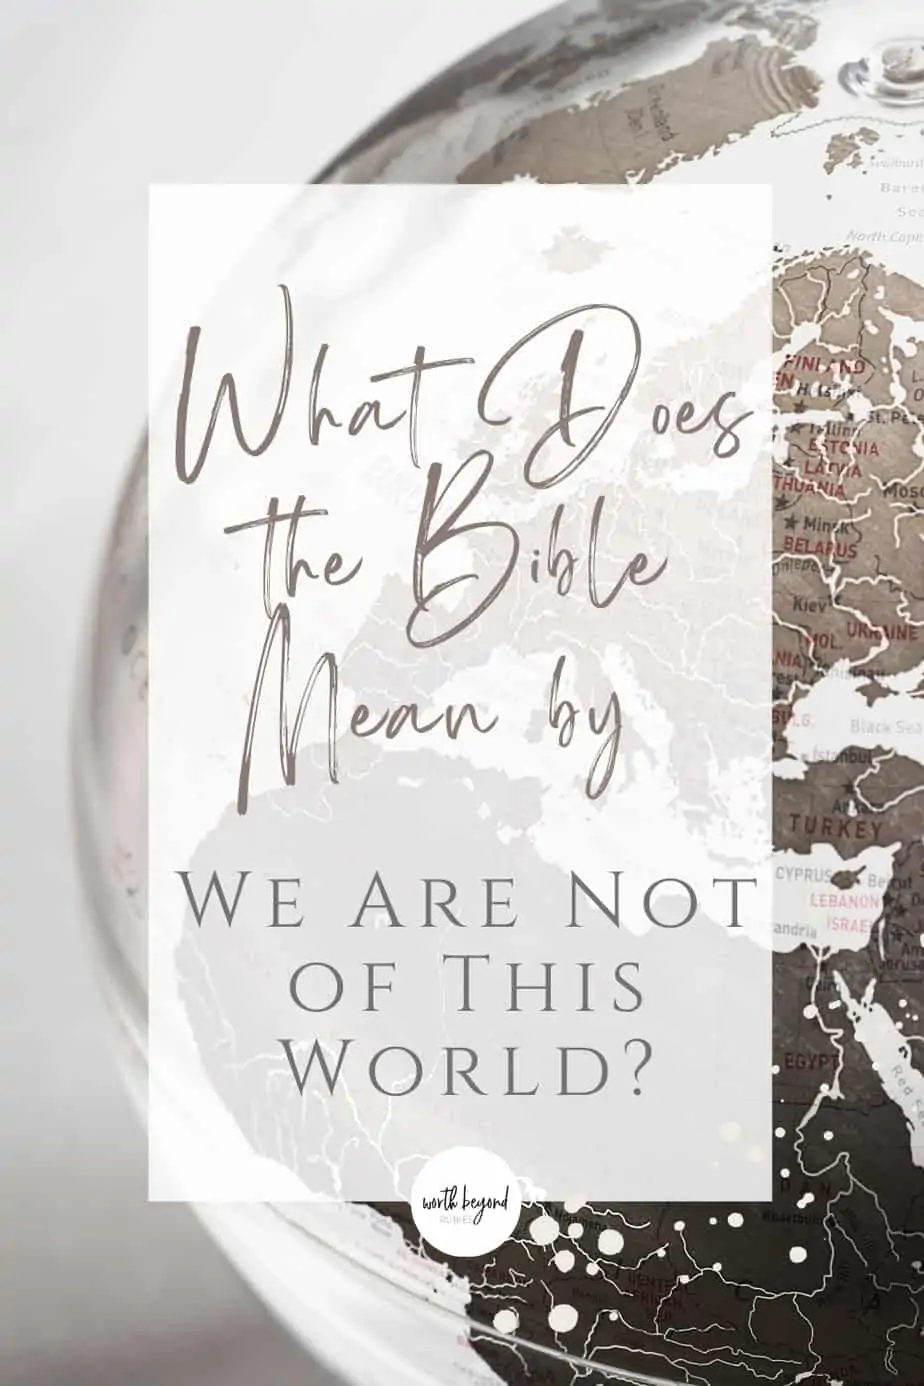 An image of a brown and white globe and text that says What Does the Bible Mean by We Are Not of This World?